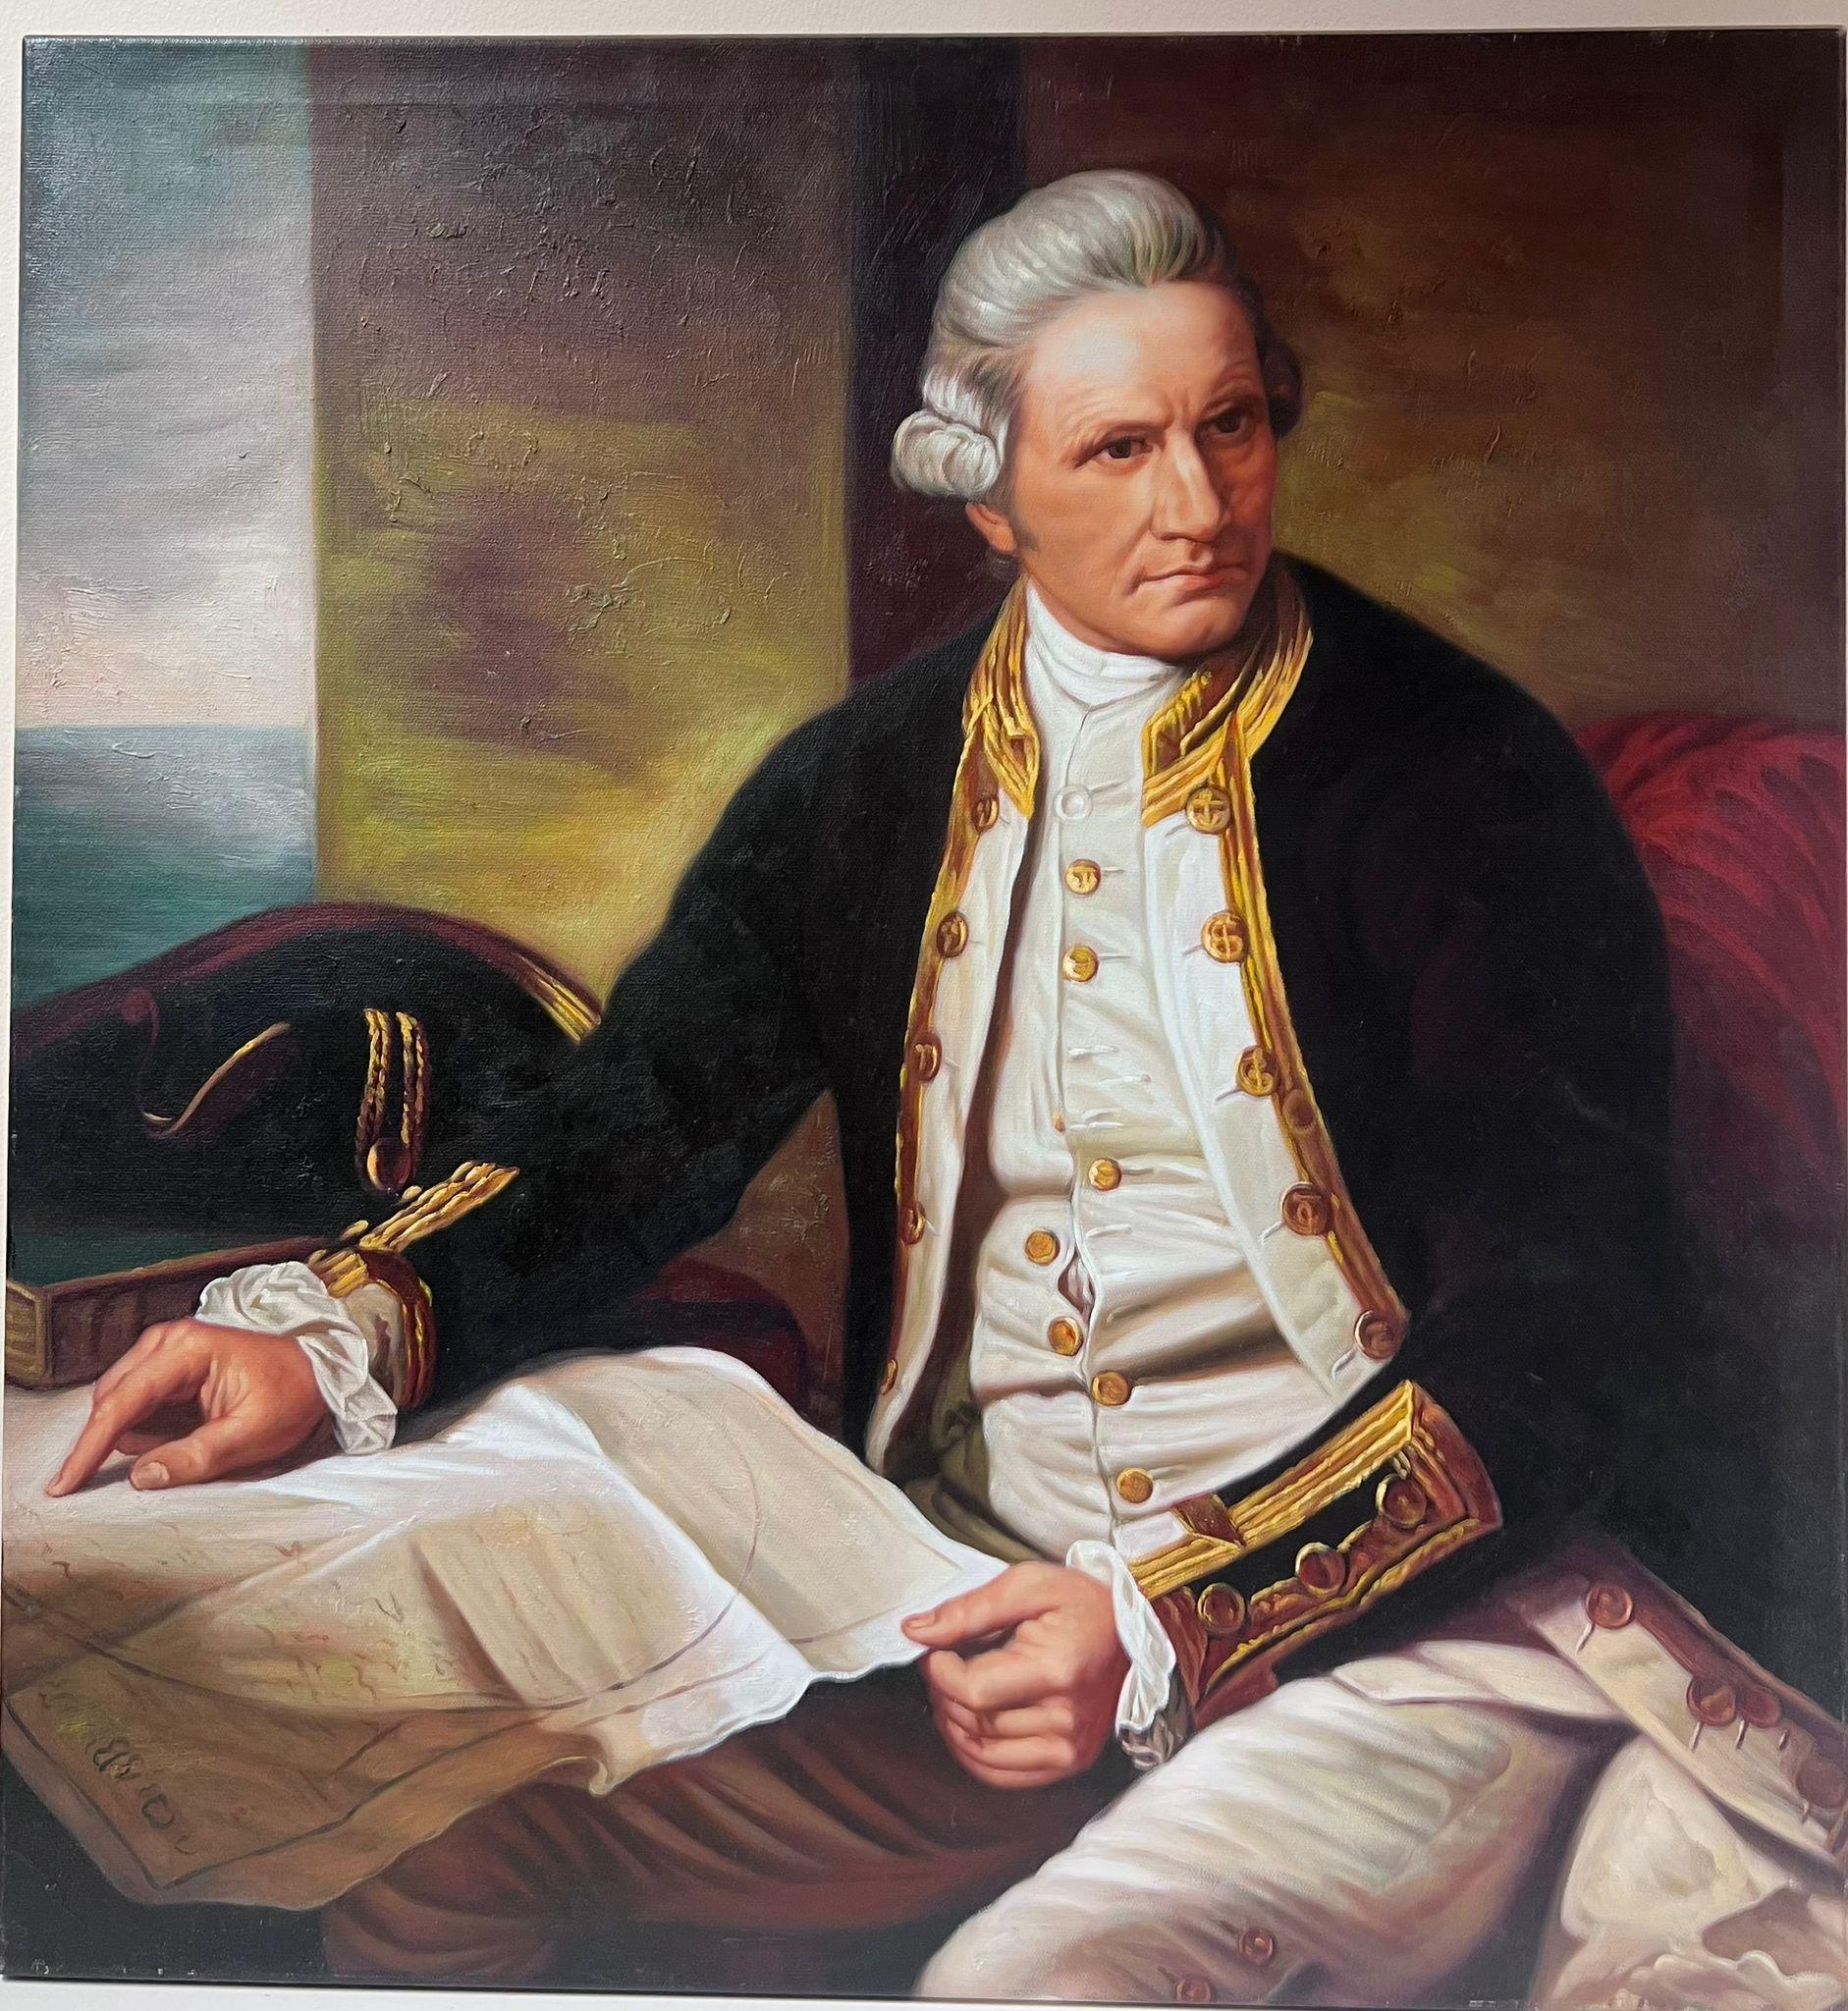 Captain James Cookl
European School, late 20th century
painted after an earlier work
oil on canvas, unframed
canvas : 36 x 24 inches
provenance: private collection, Wiltshire, England
condition: very good and sound condition 